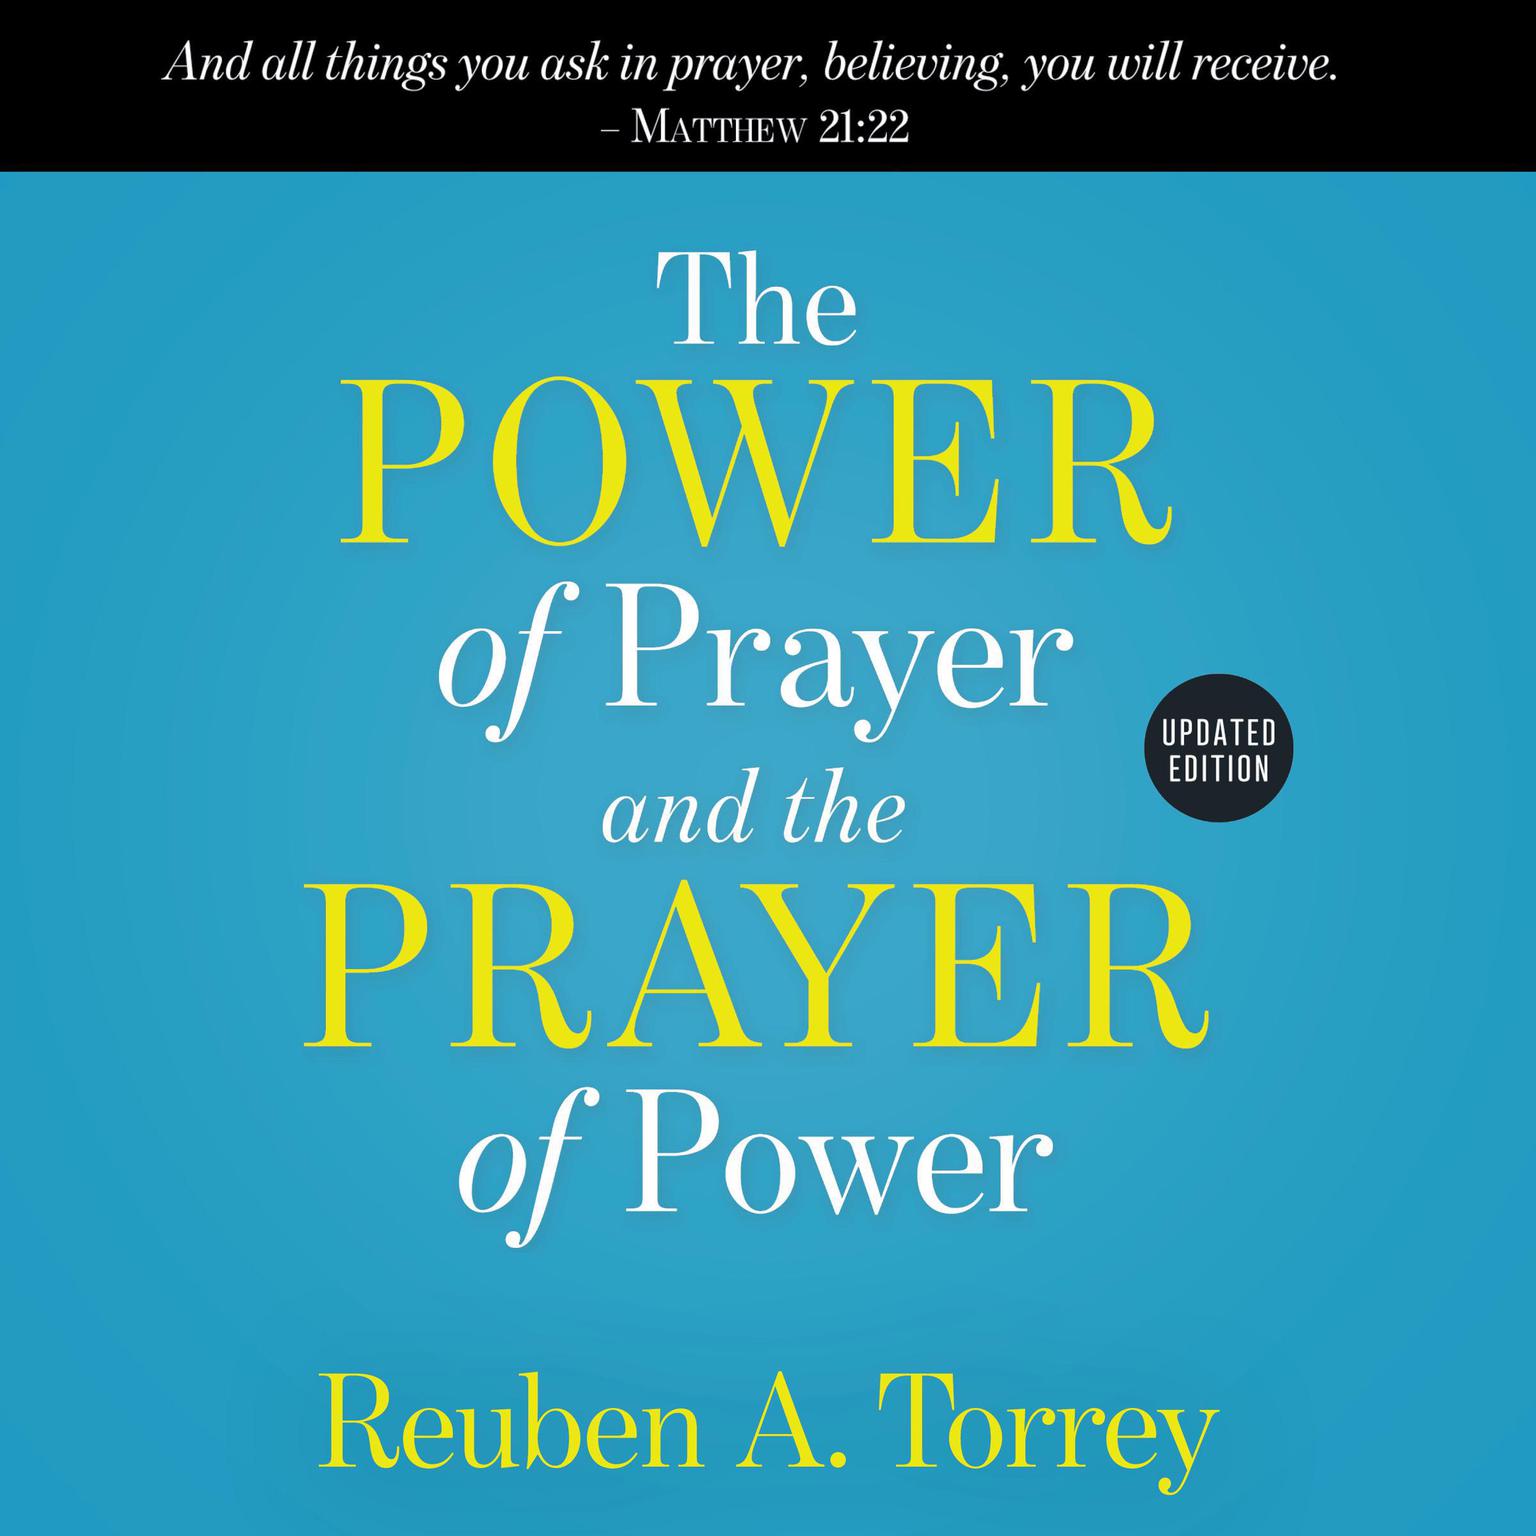 The Power of Prayer and the Prayer of Power Audiobook, by Reuben A. Torrey